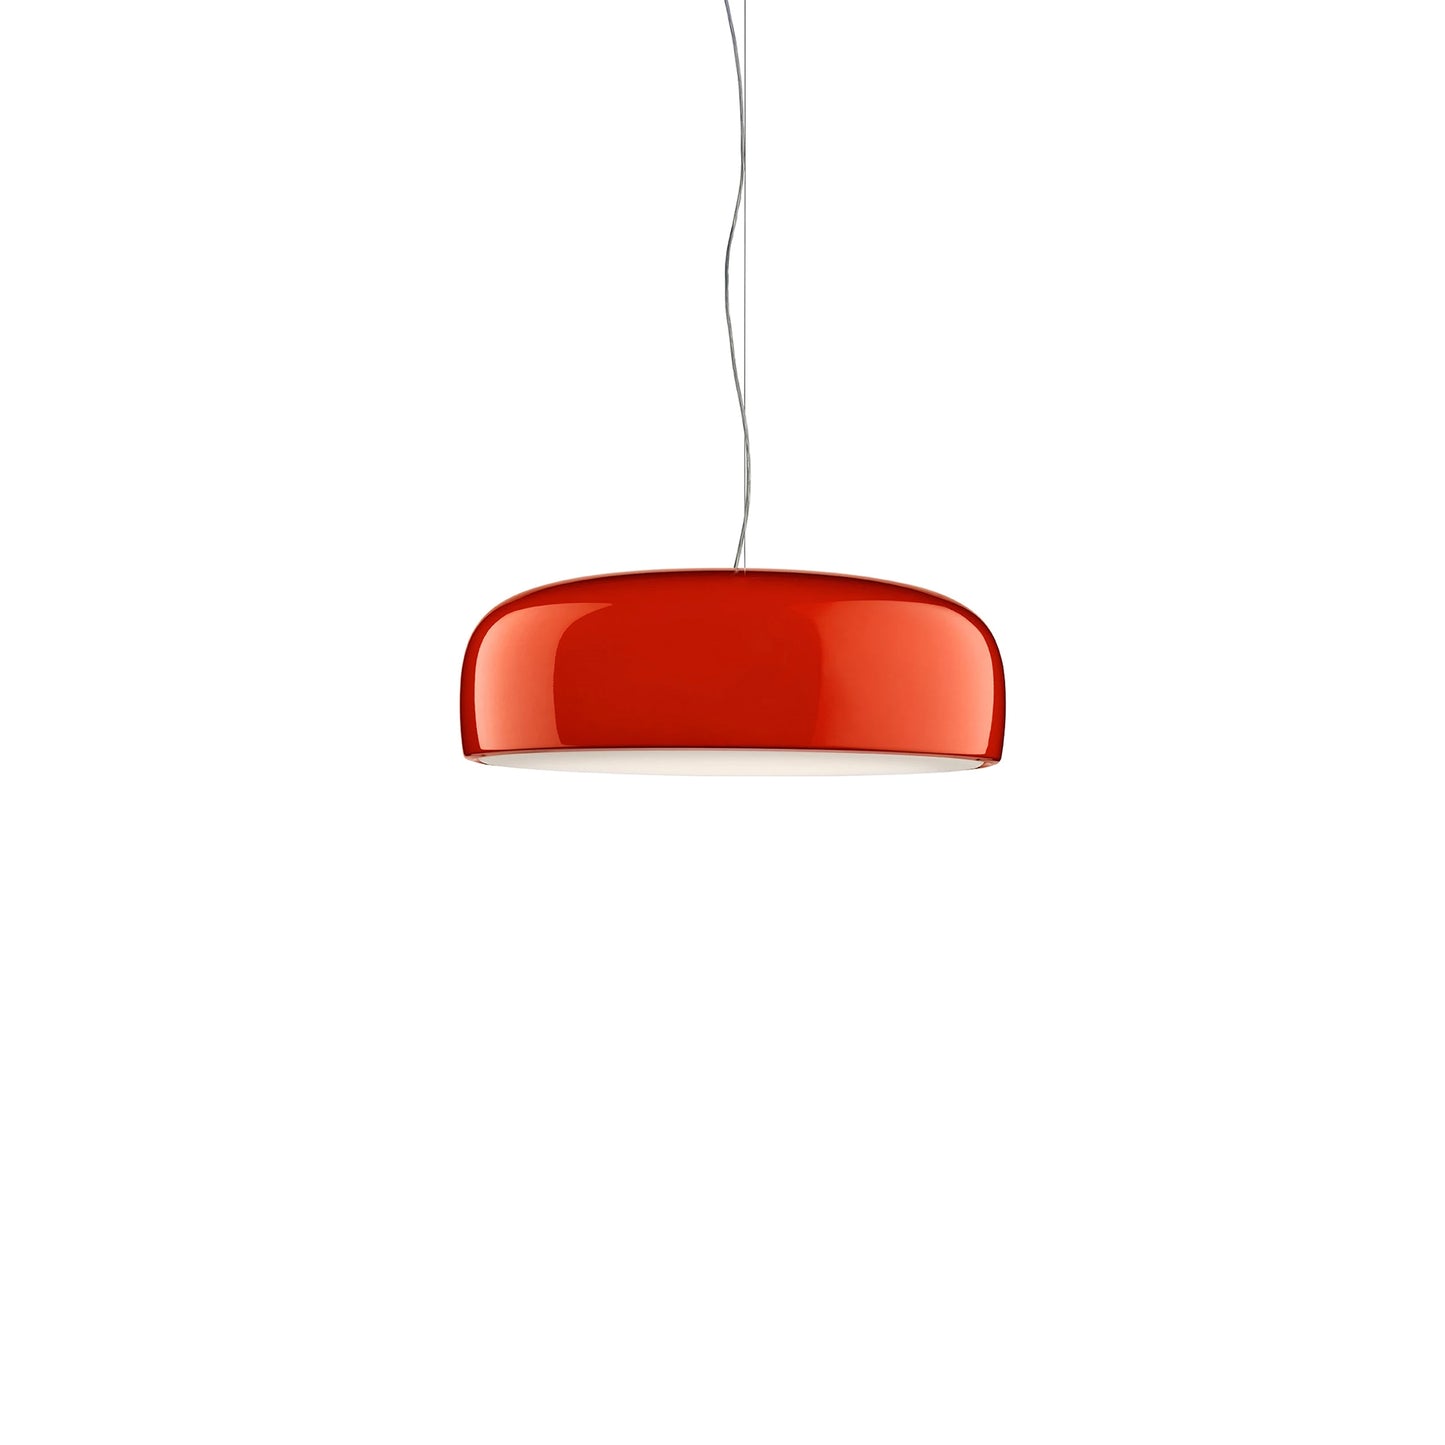 Smithfield S Pendant Lamp by Flos #Red